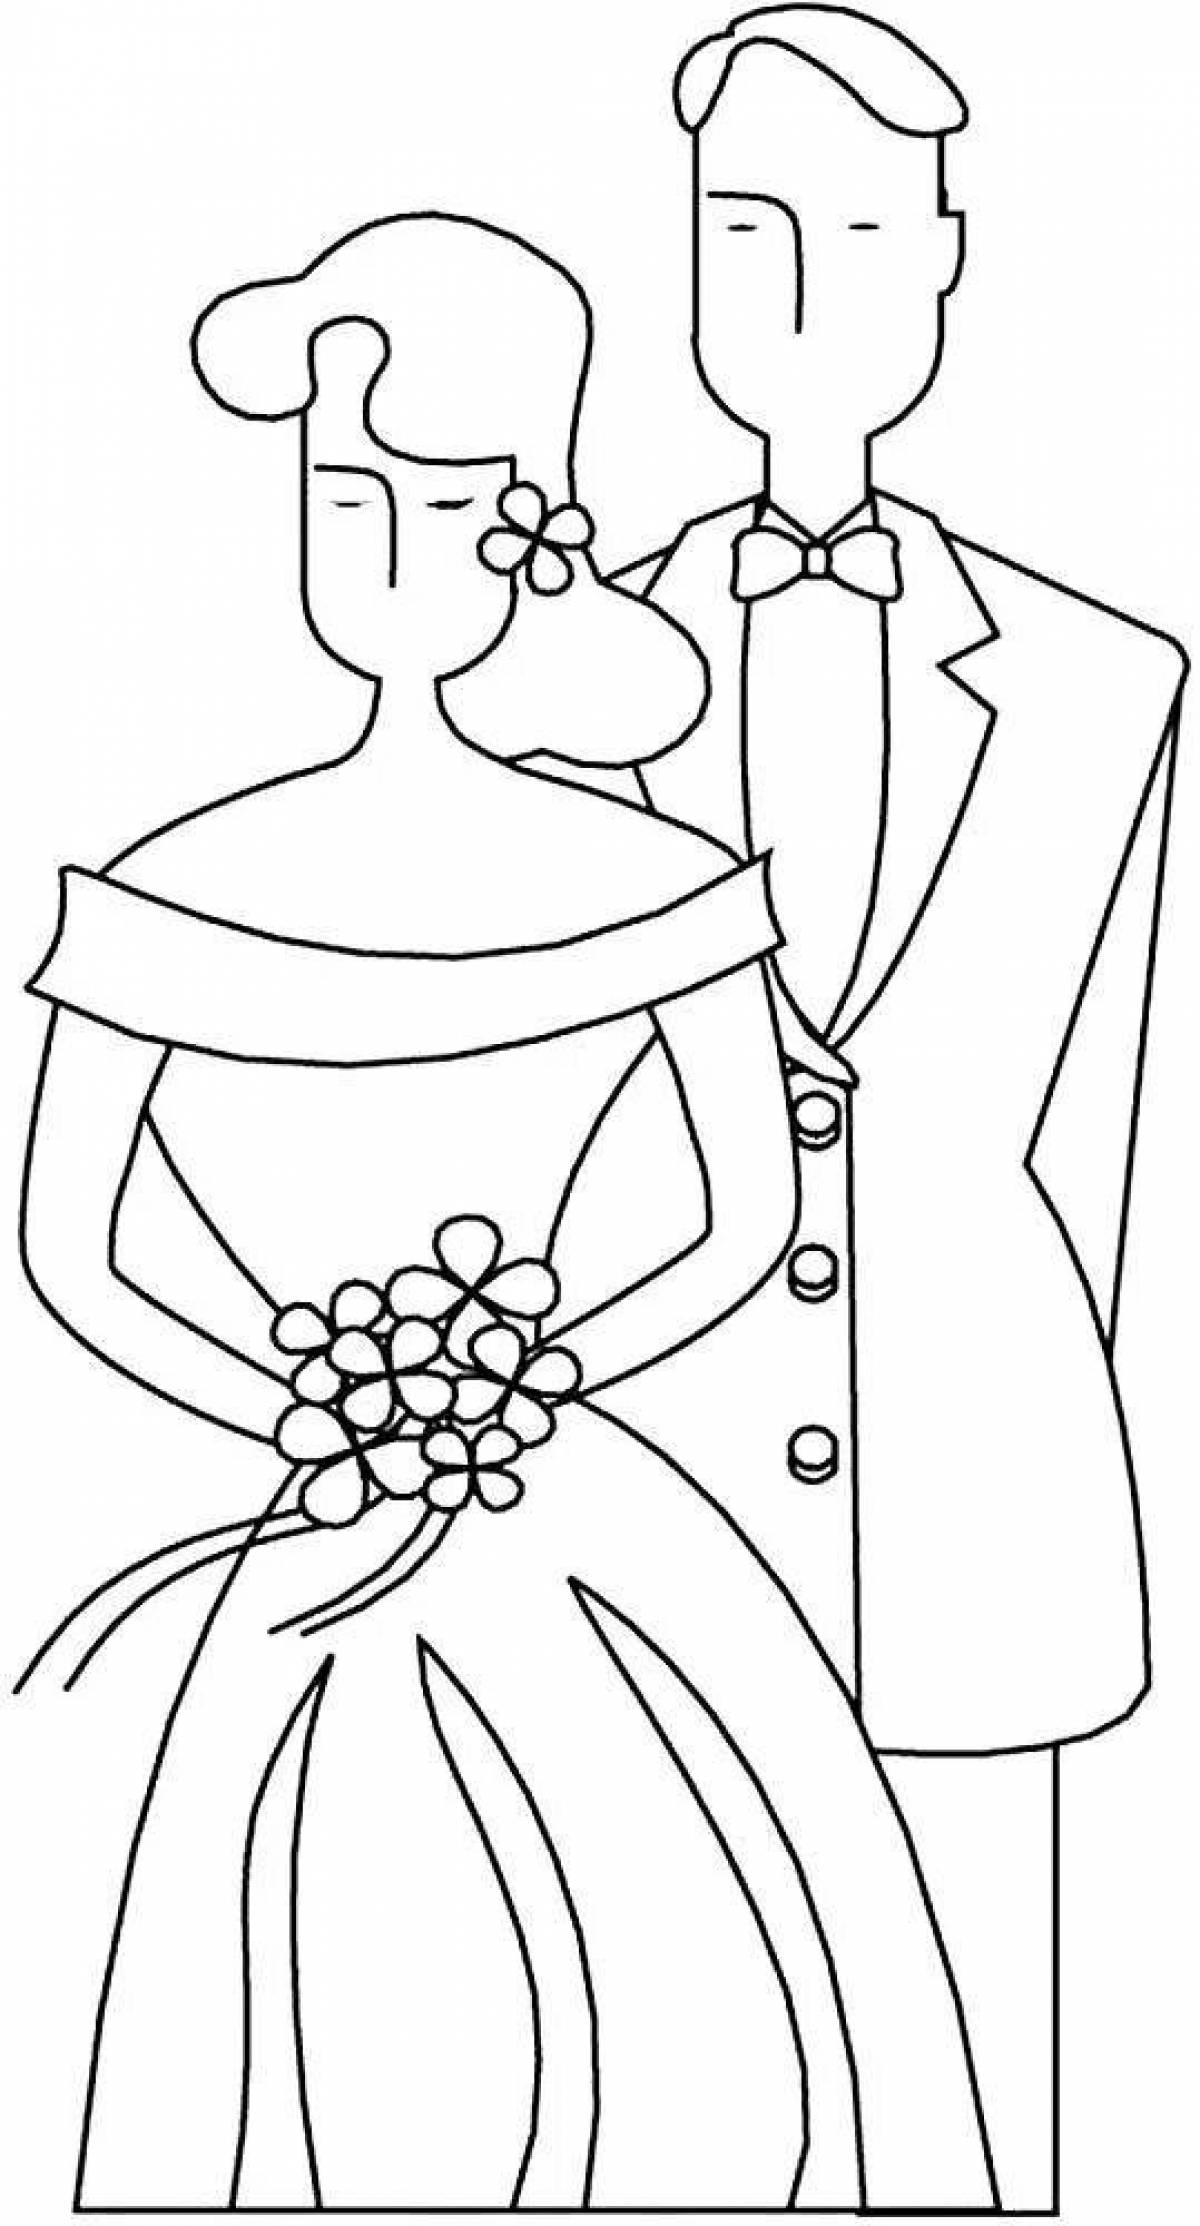 Coloring page exquisite bride and groom